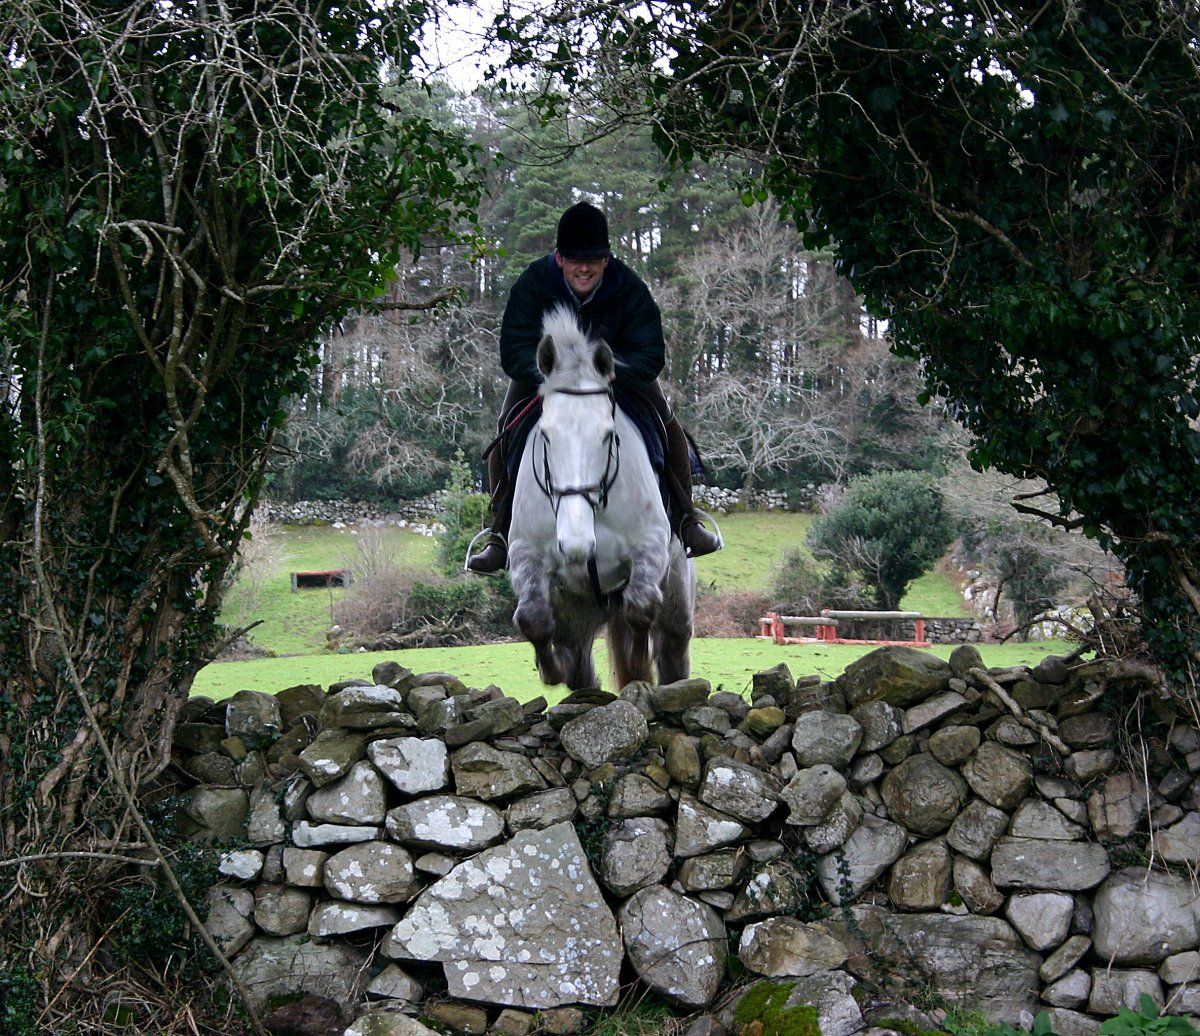 Sunday Ride out Cross Country or Hack